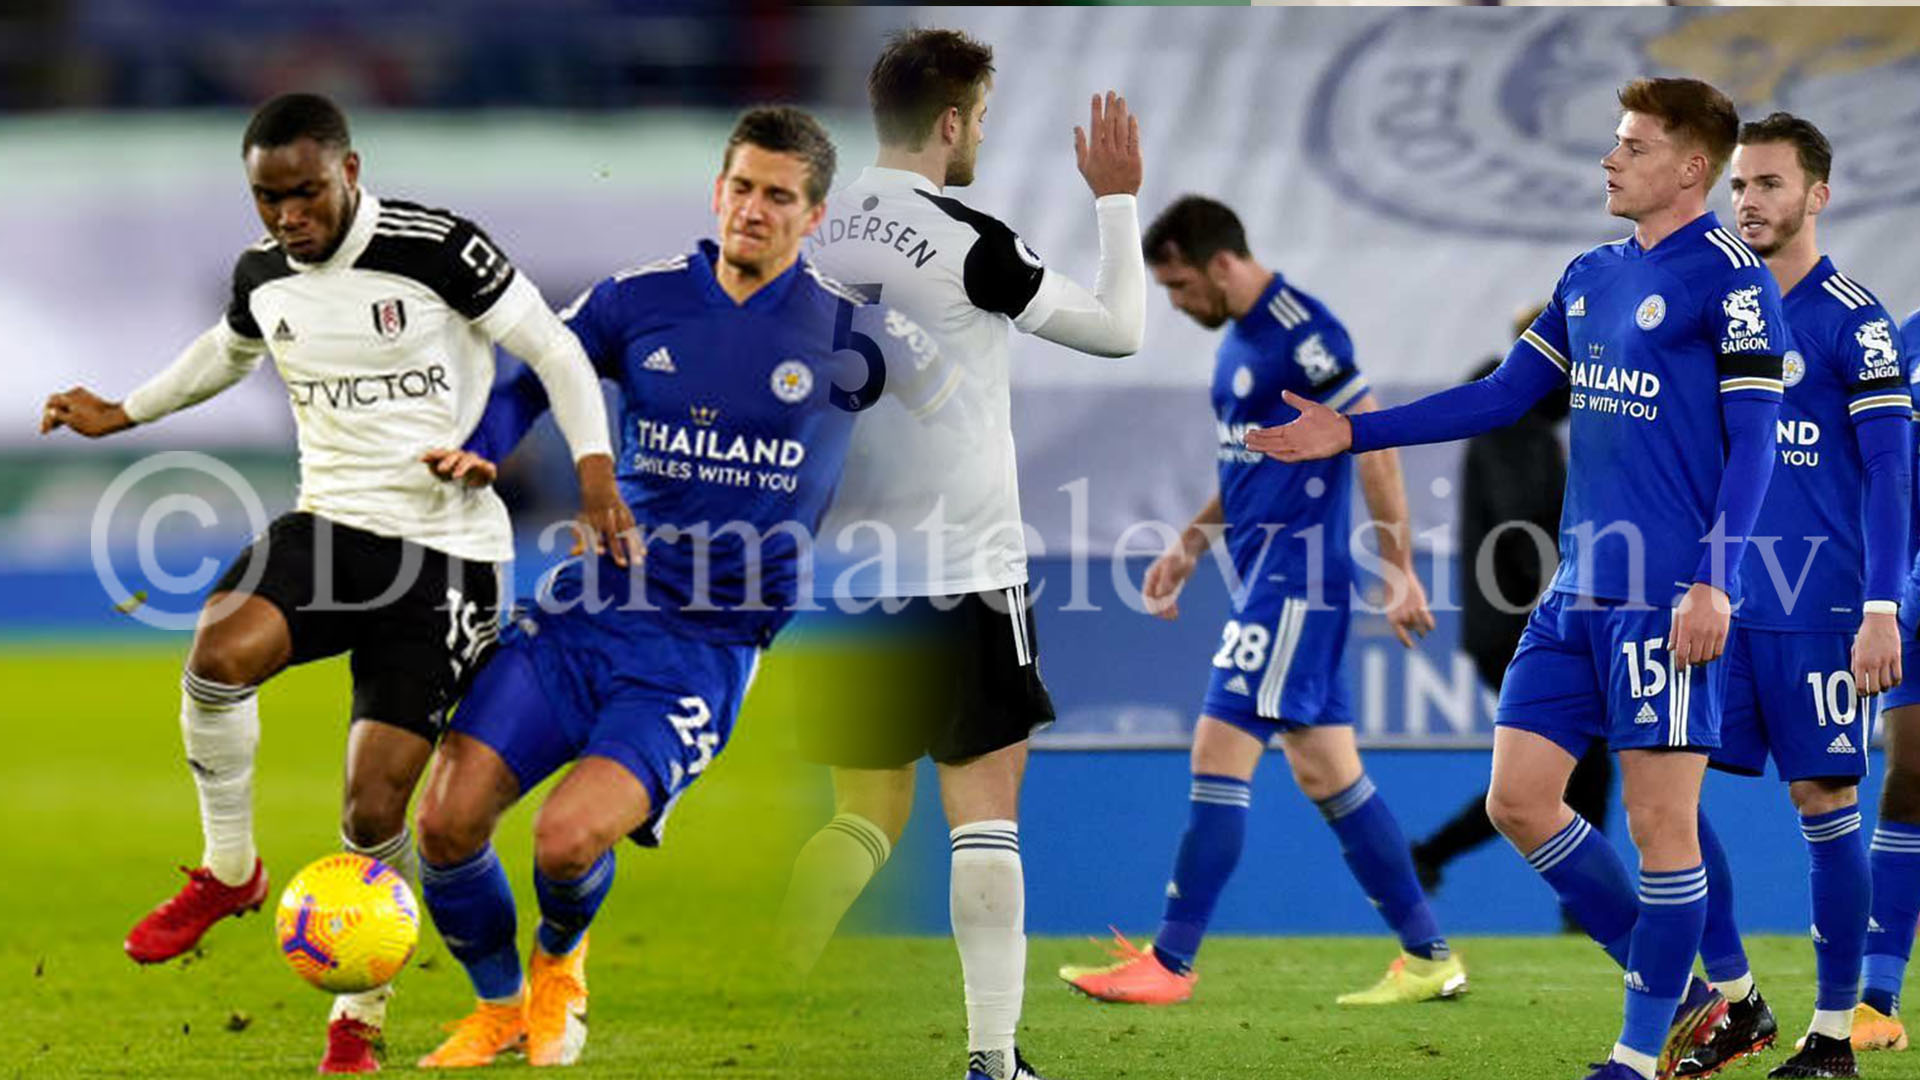 Leicester City lose to Fulham in Premier League